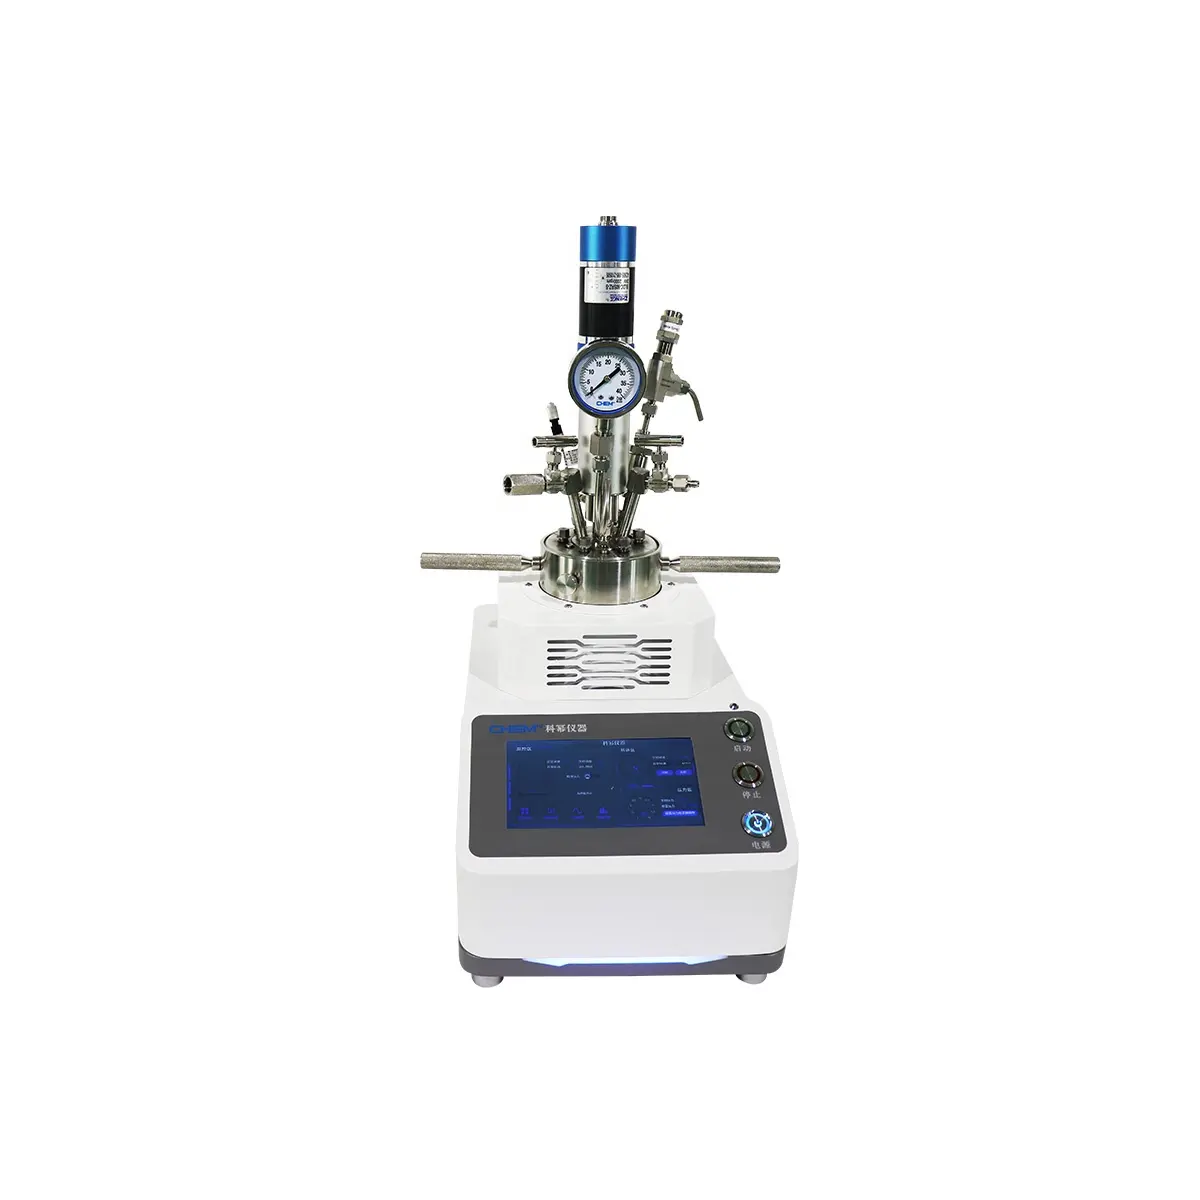 MSG Series Stirred Pressure Vessels Universal Lab Reactor Stainless Steel or Hastelloy Quick Opening Laboratory Stirring Reactor